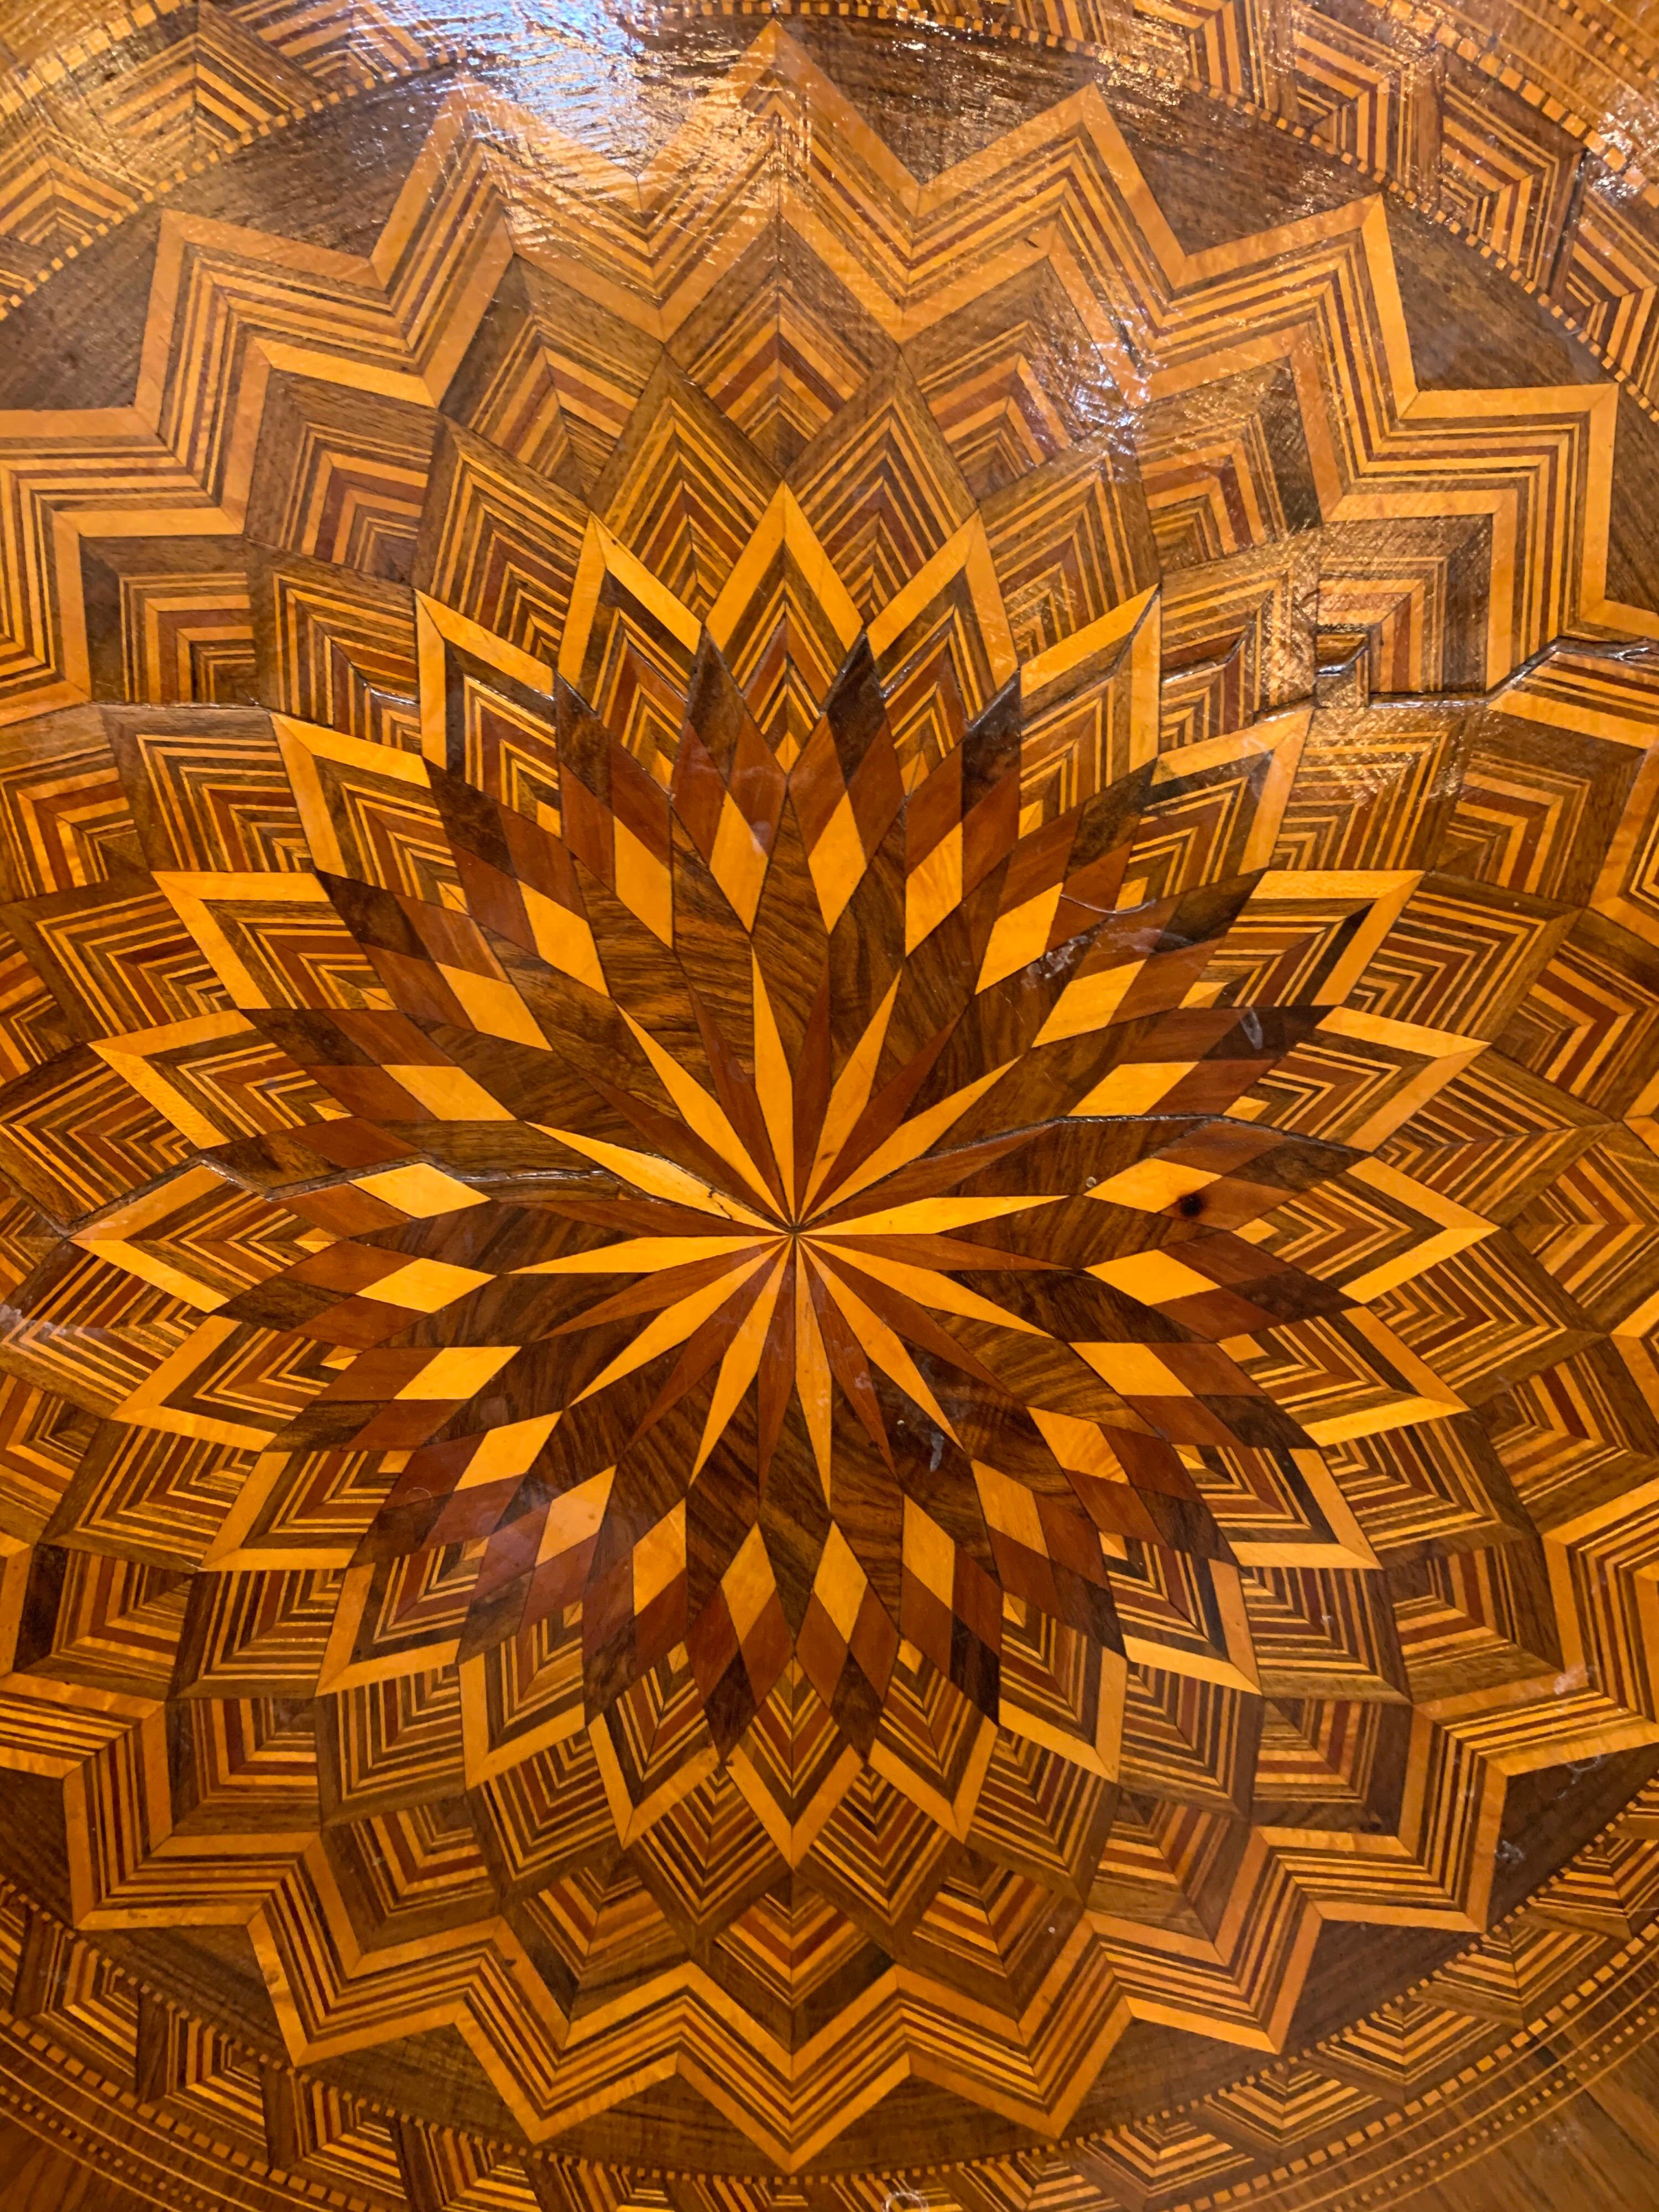 Beautiful 19th century Northern Italian inlaid multi-speciman wood side table. Featuring an amazing intricate star pattern. Very impressive craftsmanship!
Note: There 2 cracks on the outside edge of the table.